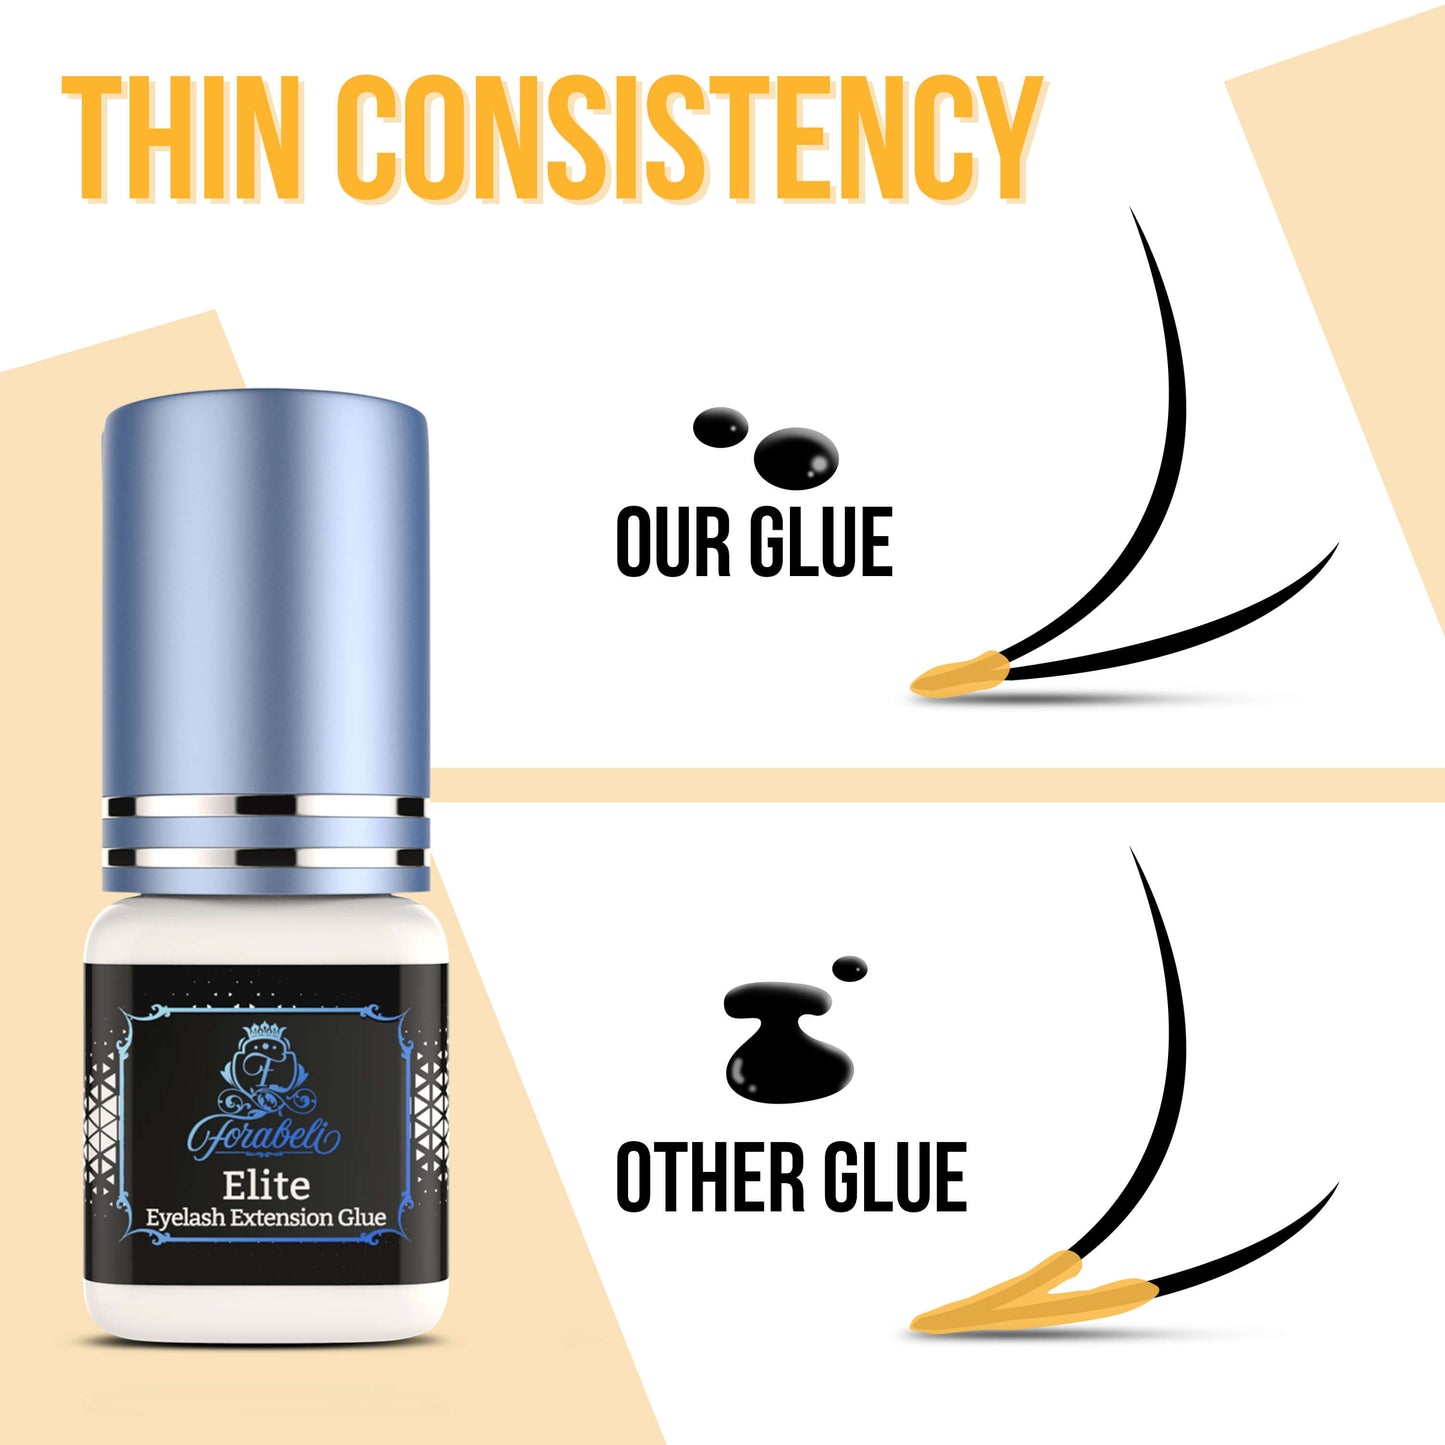 Elite eyelash extension glue with thin consistency for precise and delicate application.